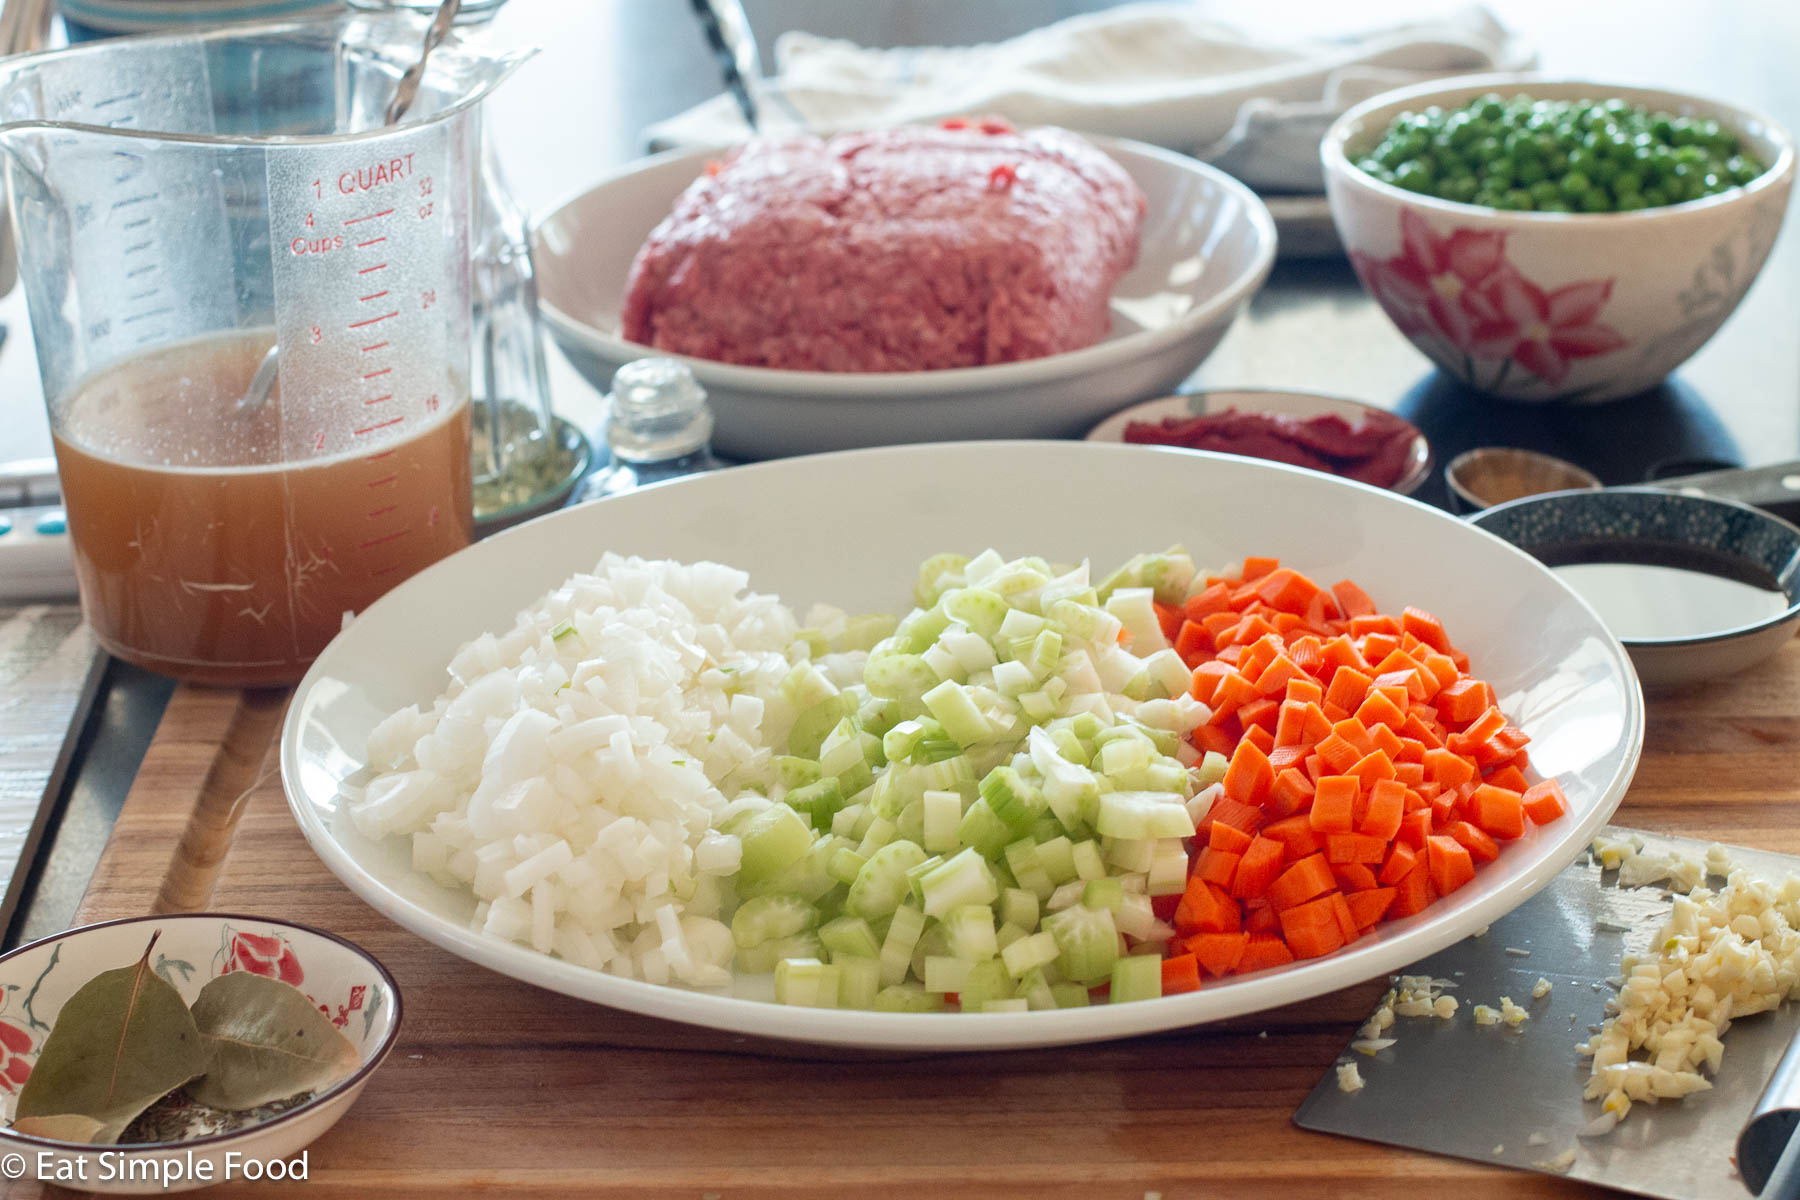 Large white plate with diced onions, celery, and carrots. Plate of ground beef and bowl of raw green peas in the background.